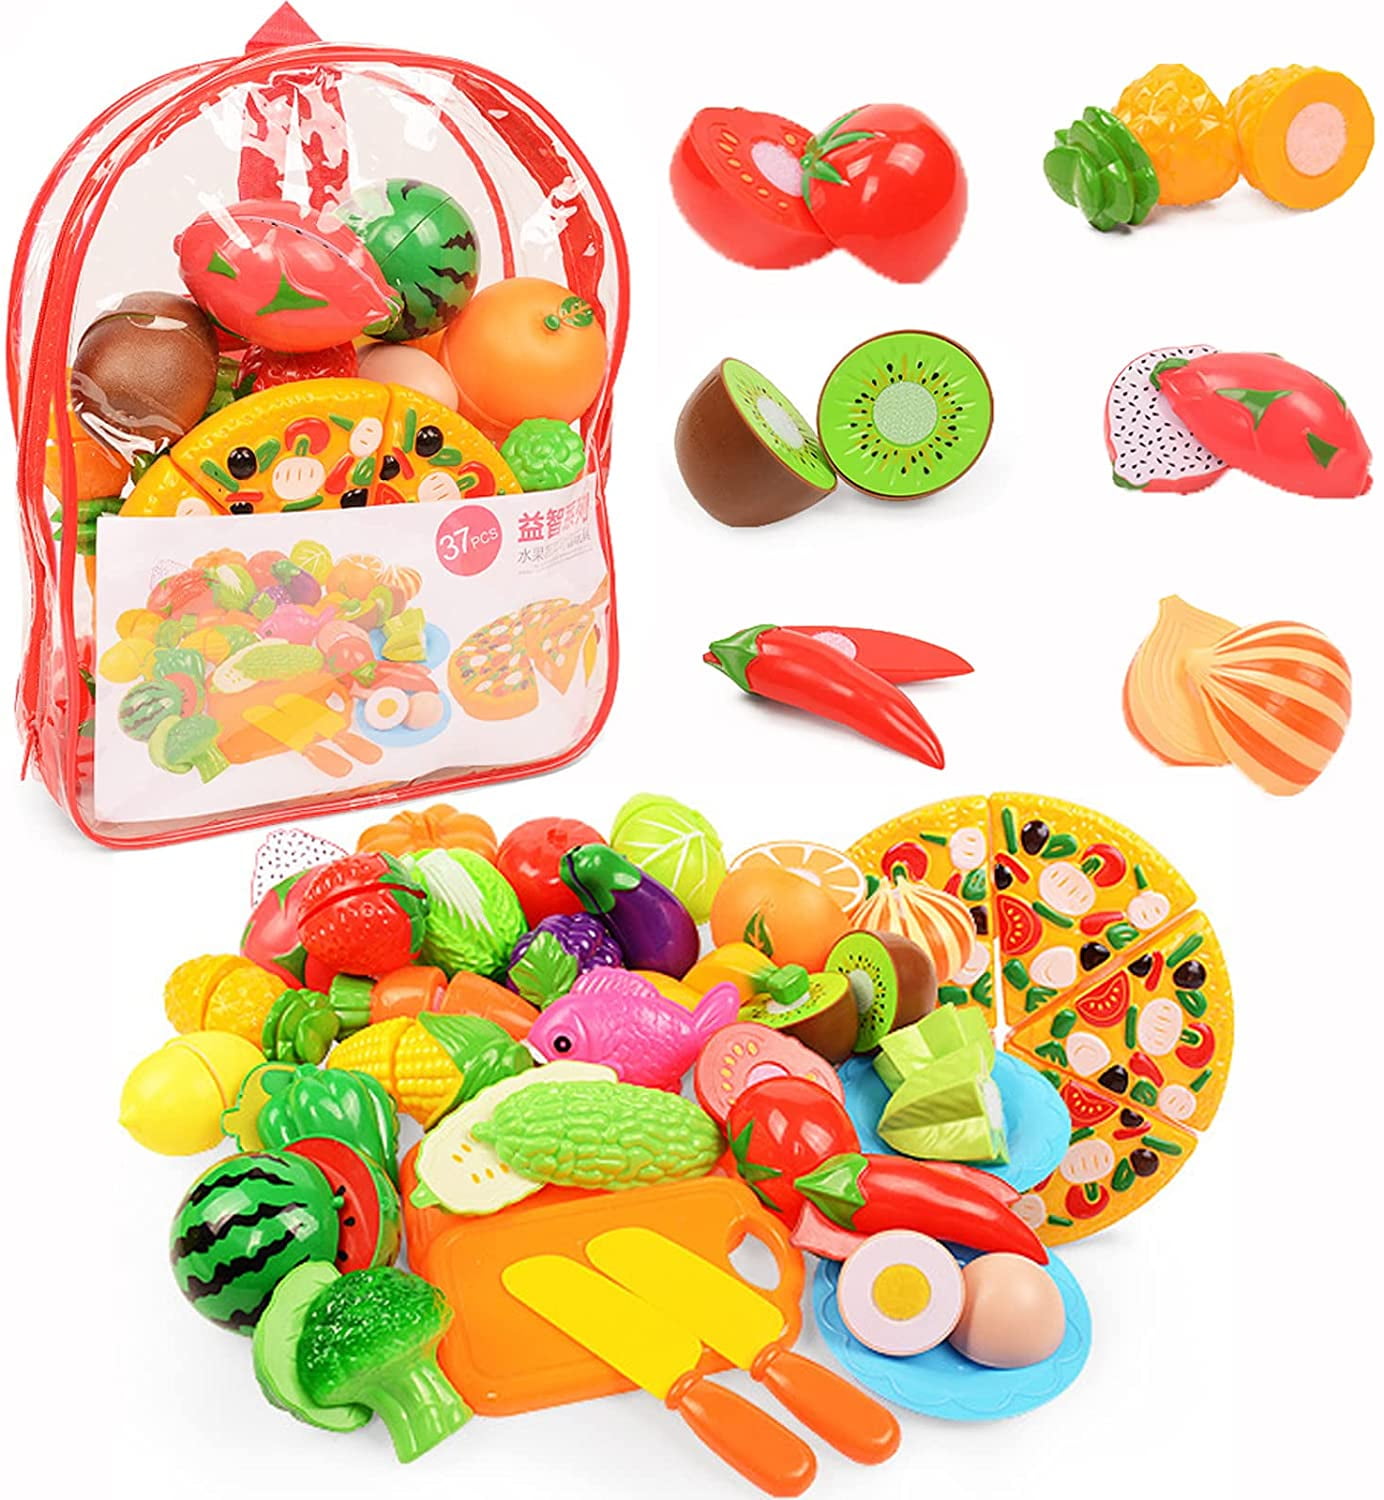 Play Food Sets for Kids Kitchen,37 Pcs Cutting Play Food Toy for ...